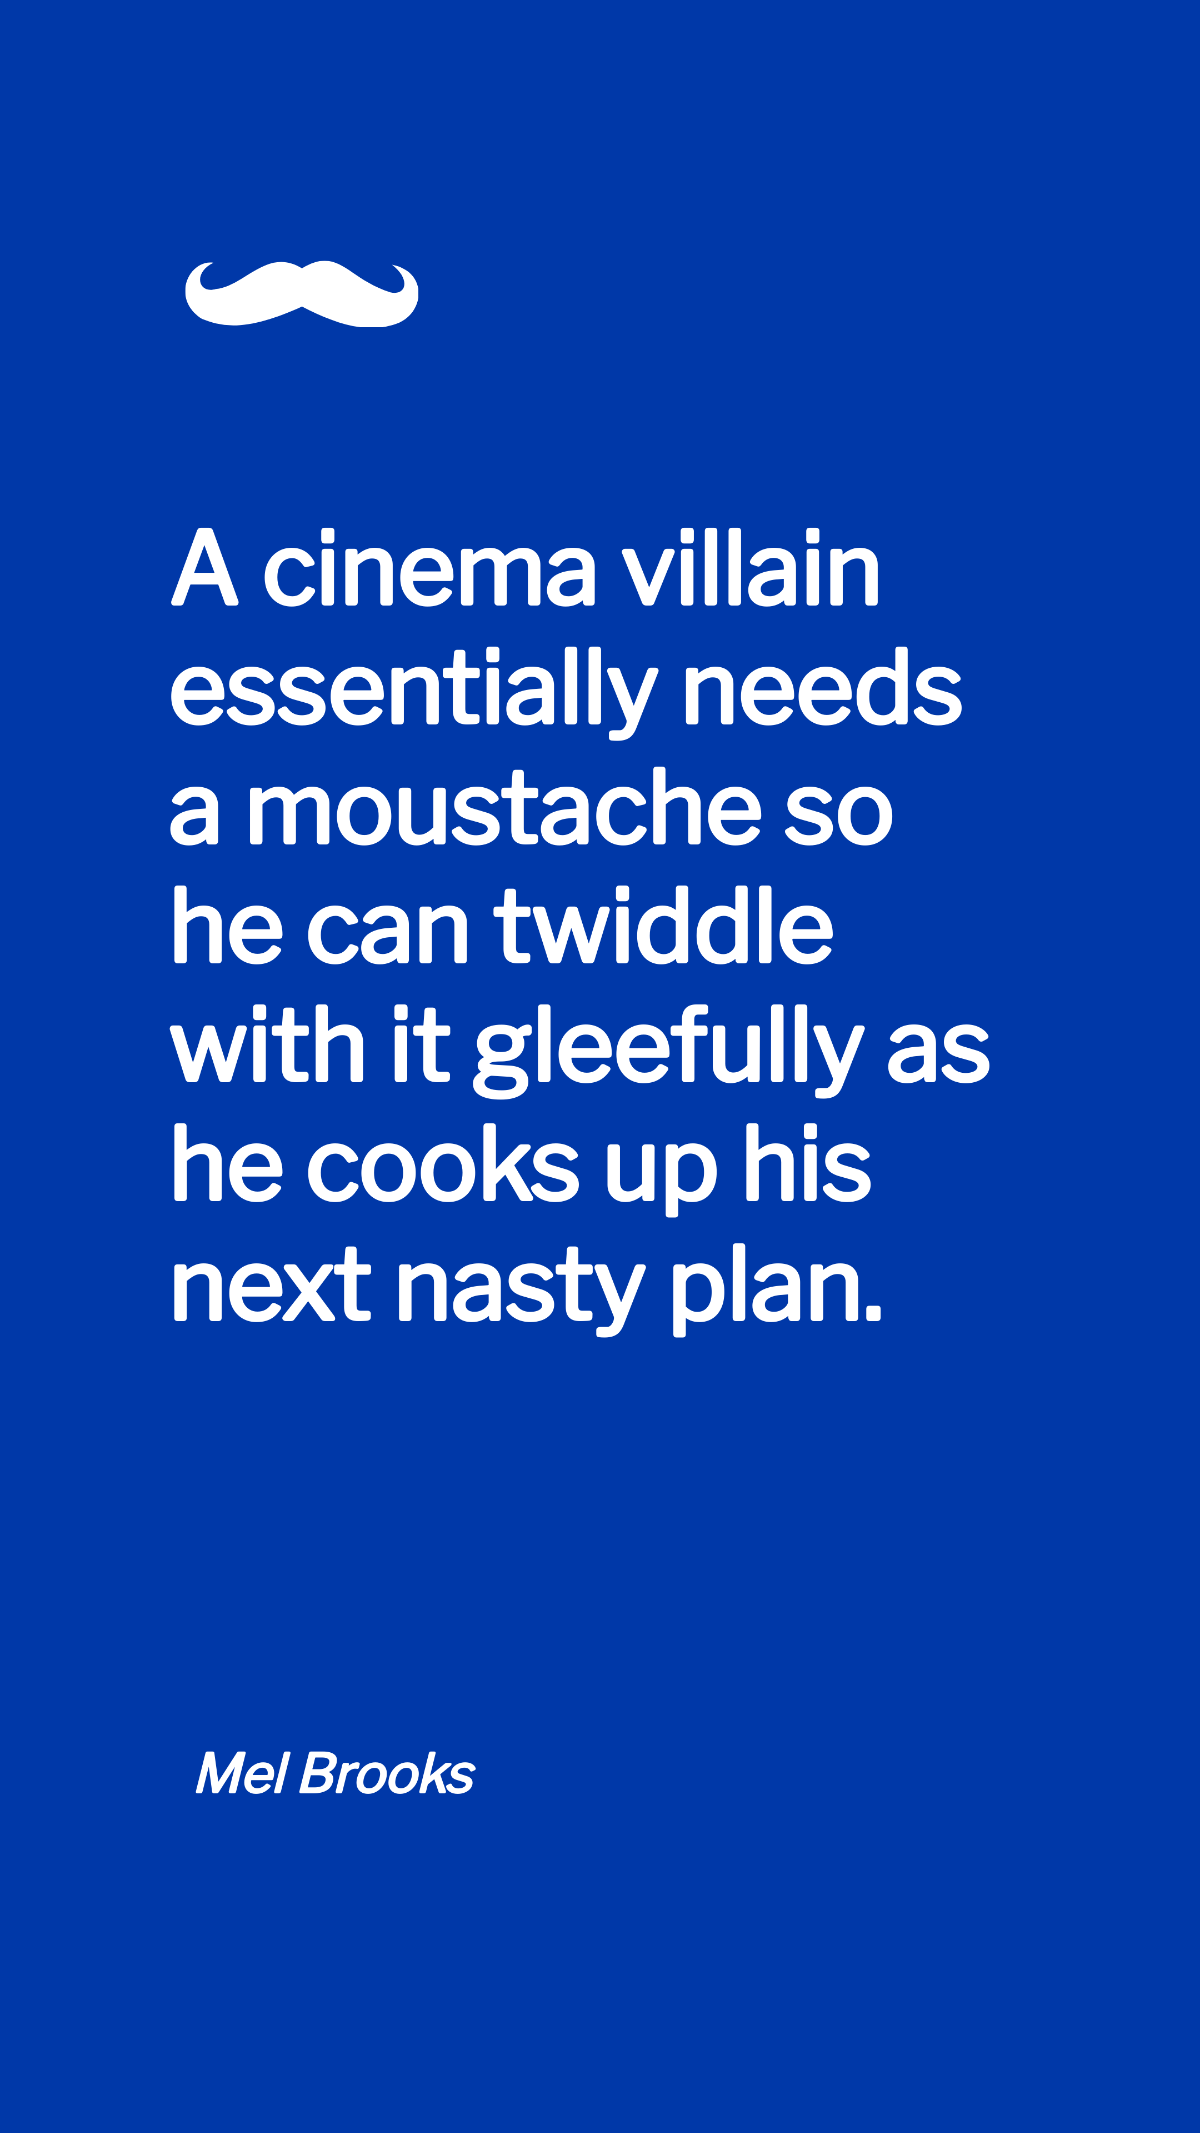 Mel Brooks - A cinema villain essentially needs a moustache so he can twiddle with it gleefully as he cooks up his next nasty plan. Template